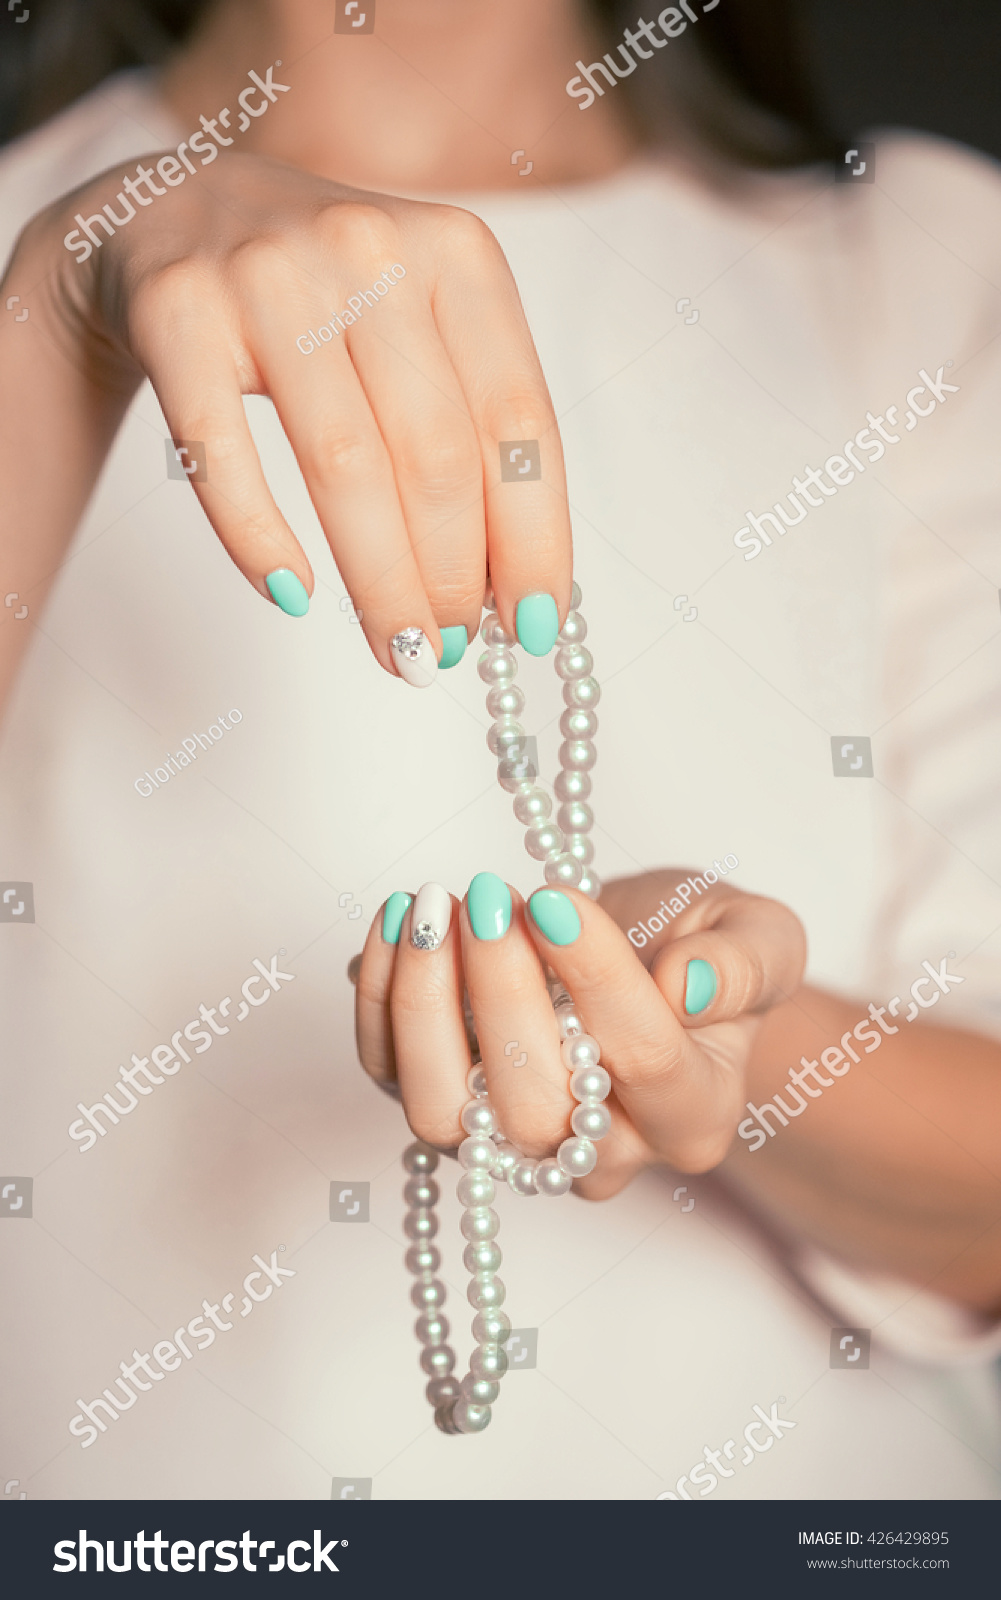 Beauty female fingernails with turquoise and white french diamond manicure and pearl #426429895